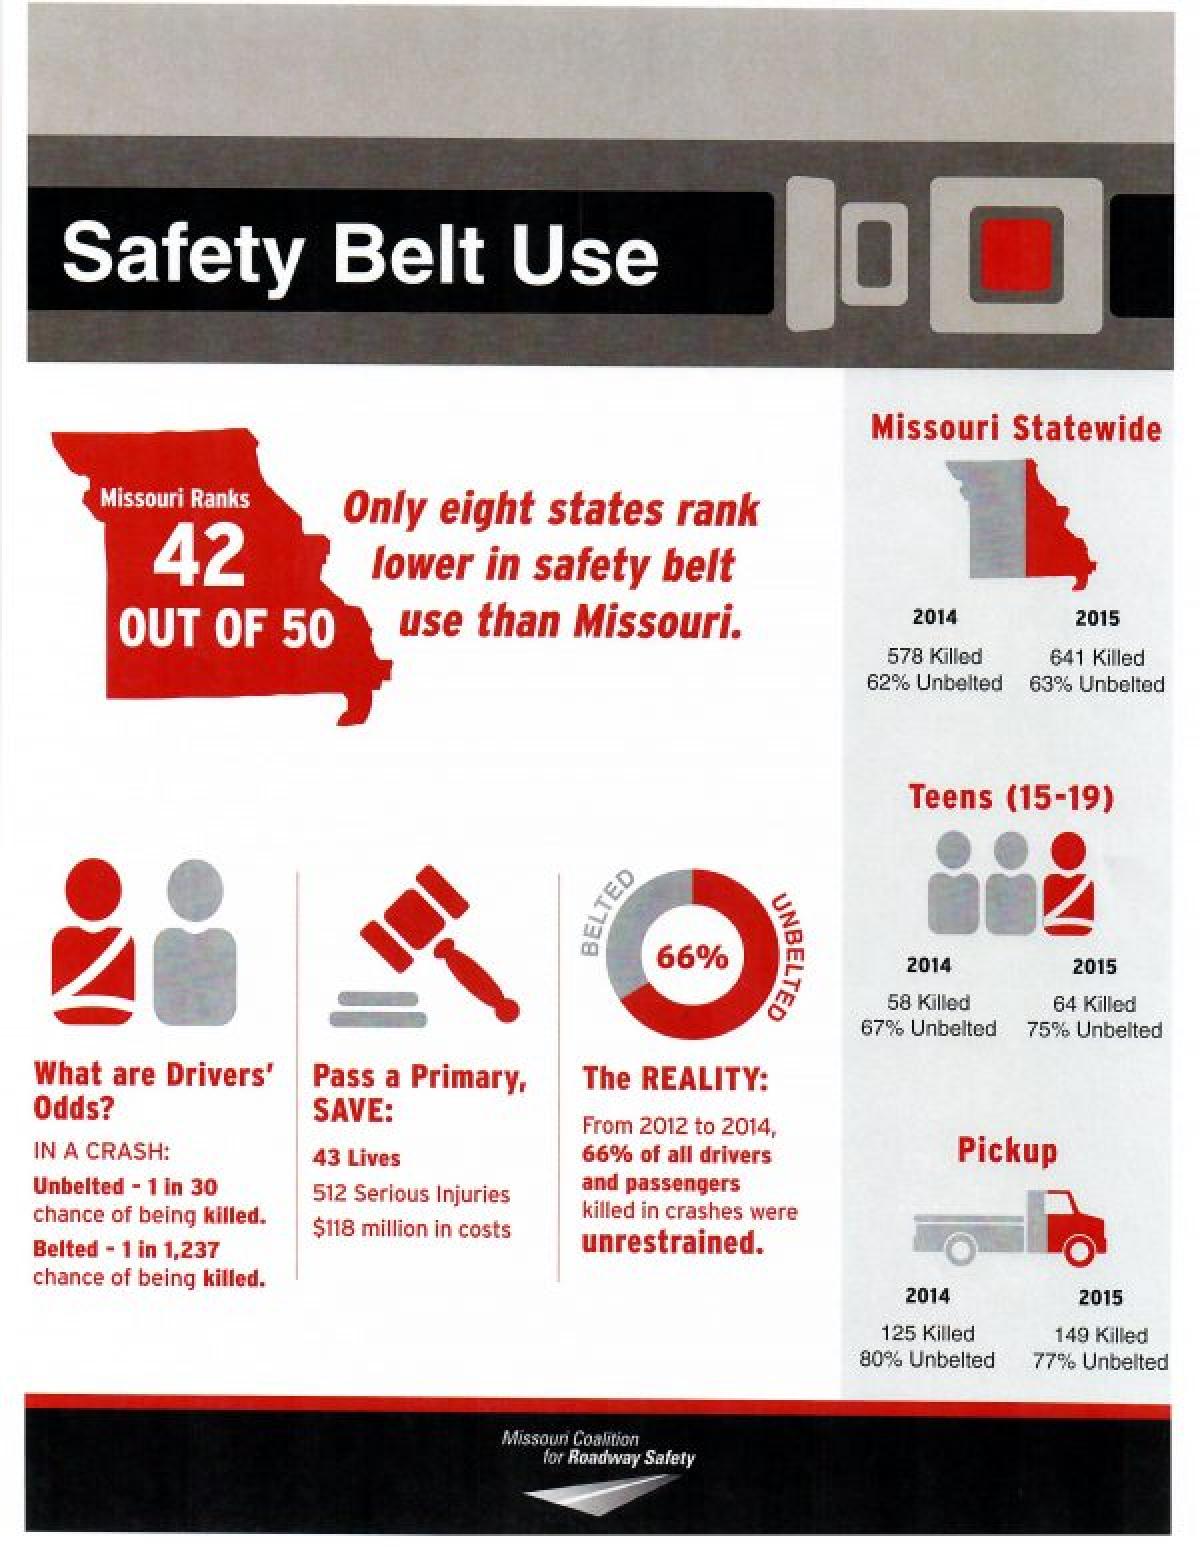 Safety Belt Use Statistics (information also included in text on page)